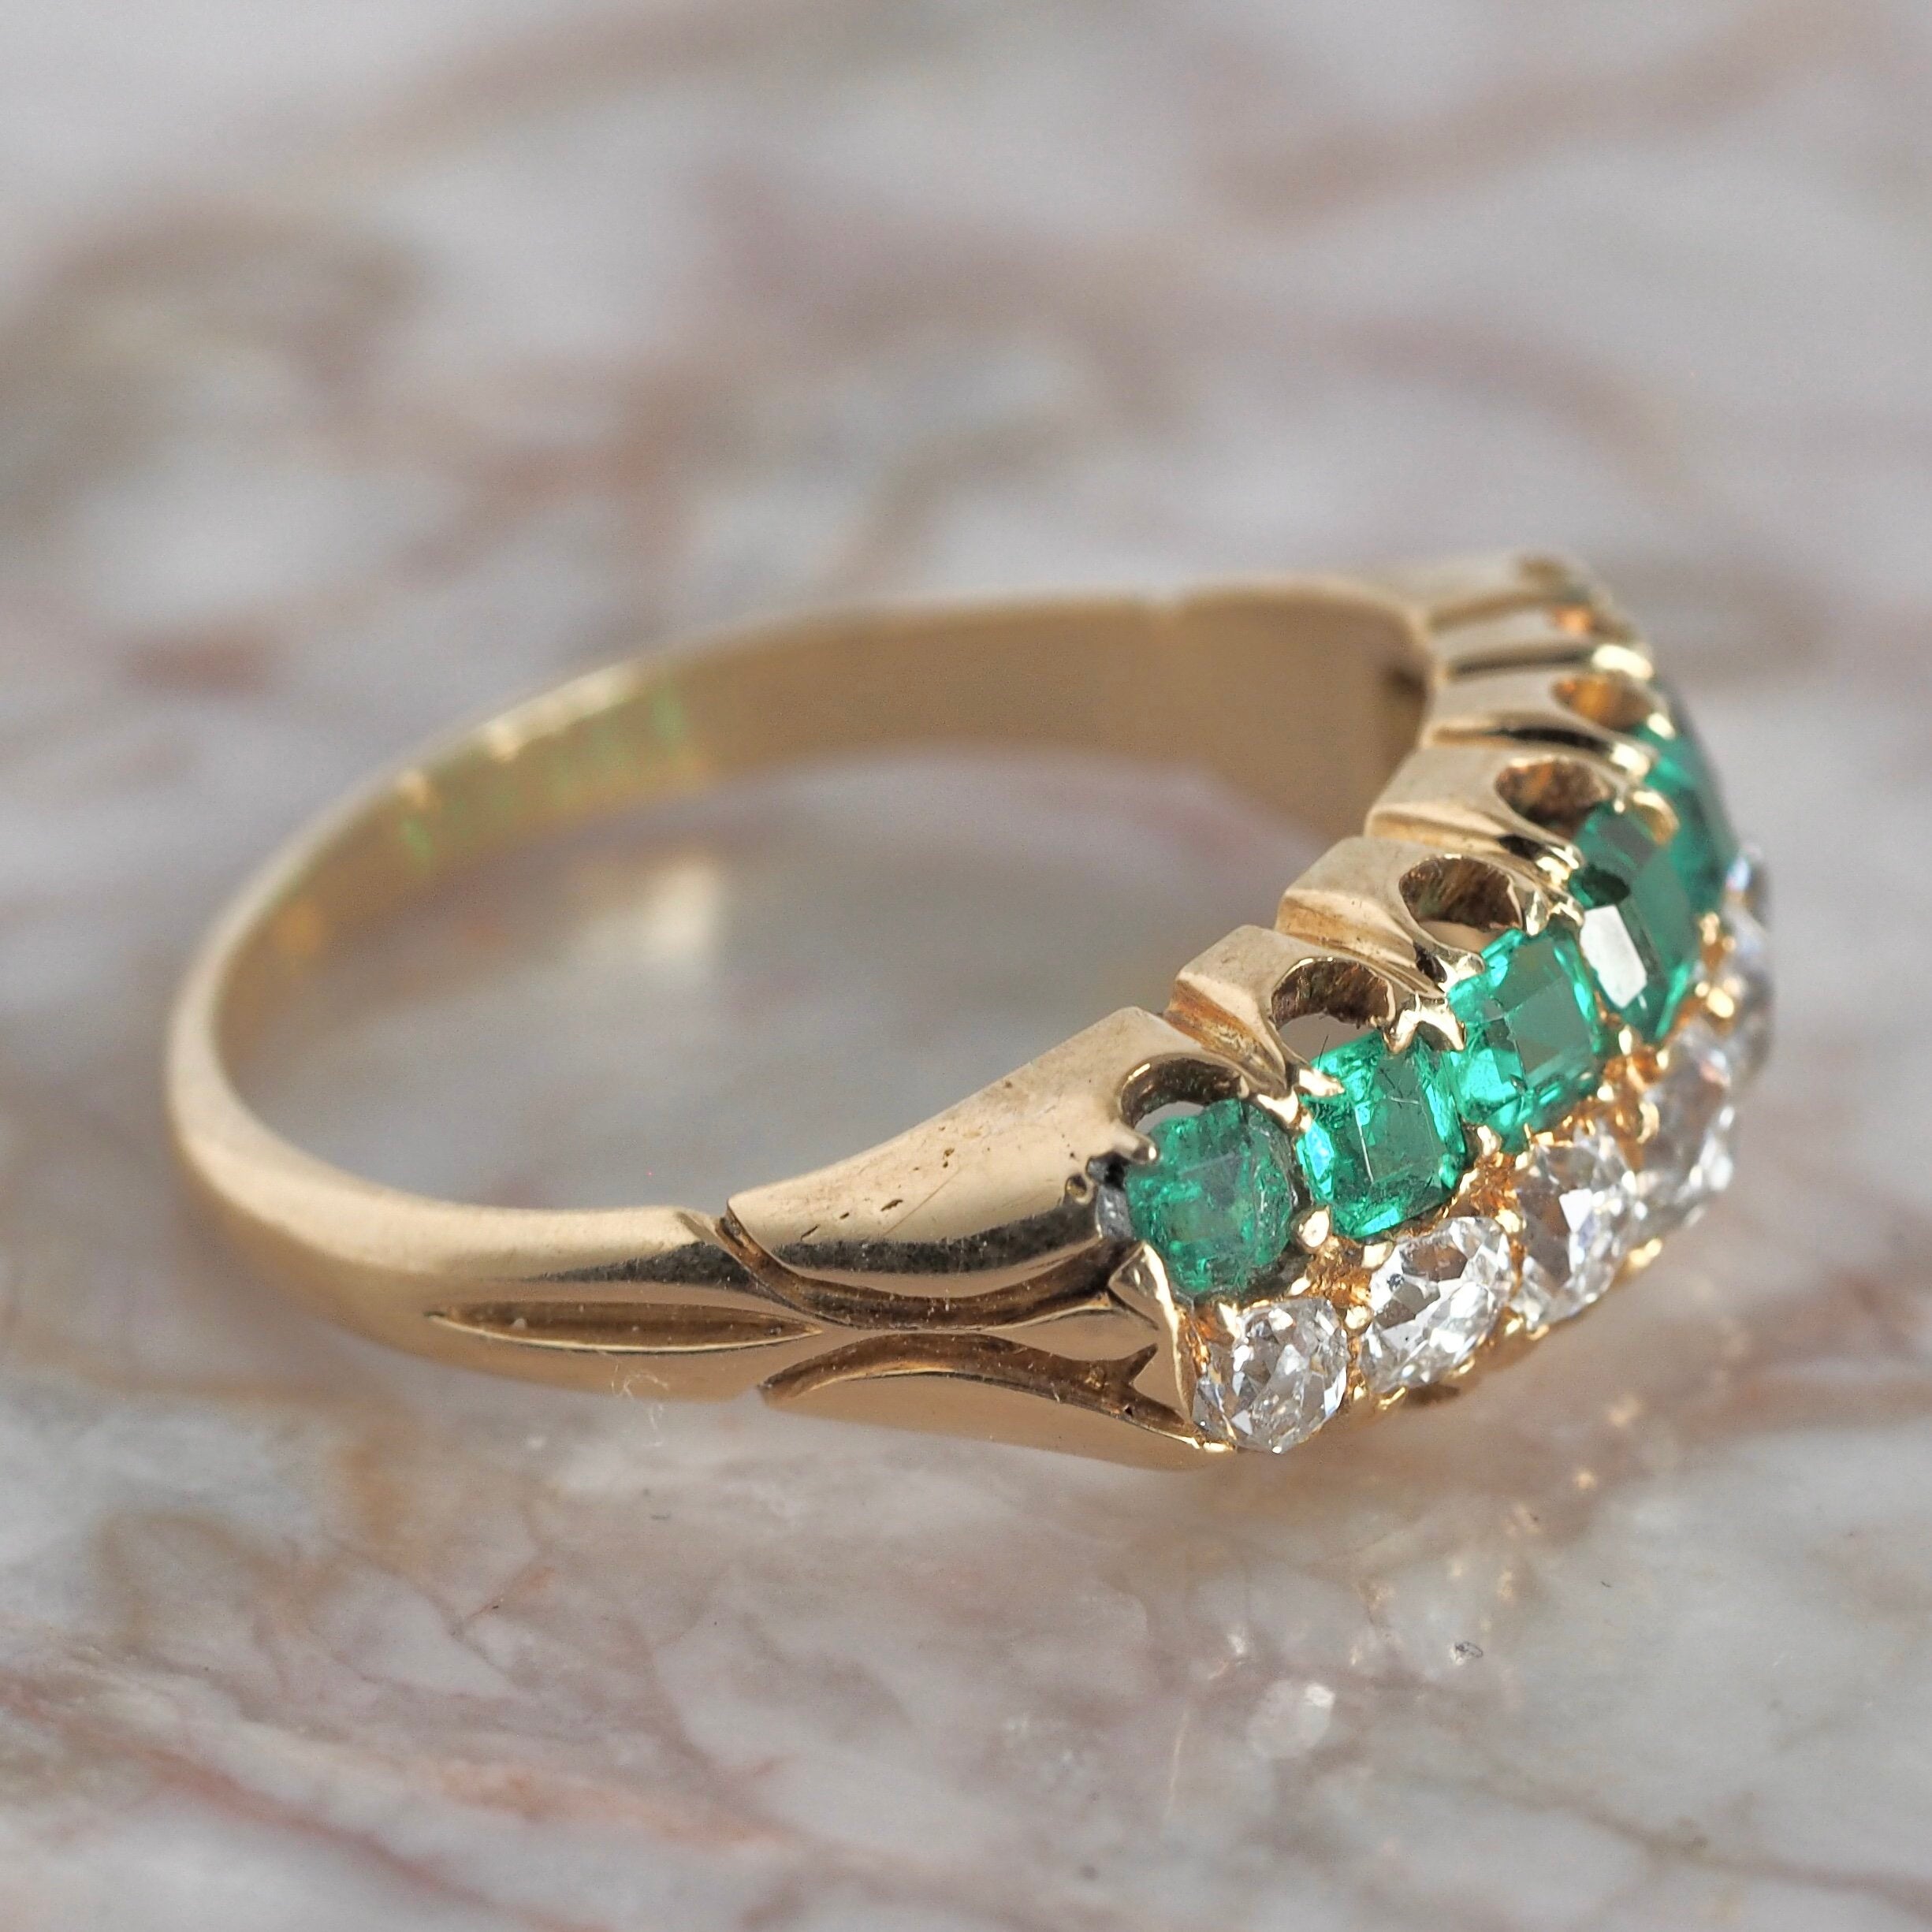 Antique Victorian 18k Gold Emerald and Diamond Double Half Hoop Ring